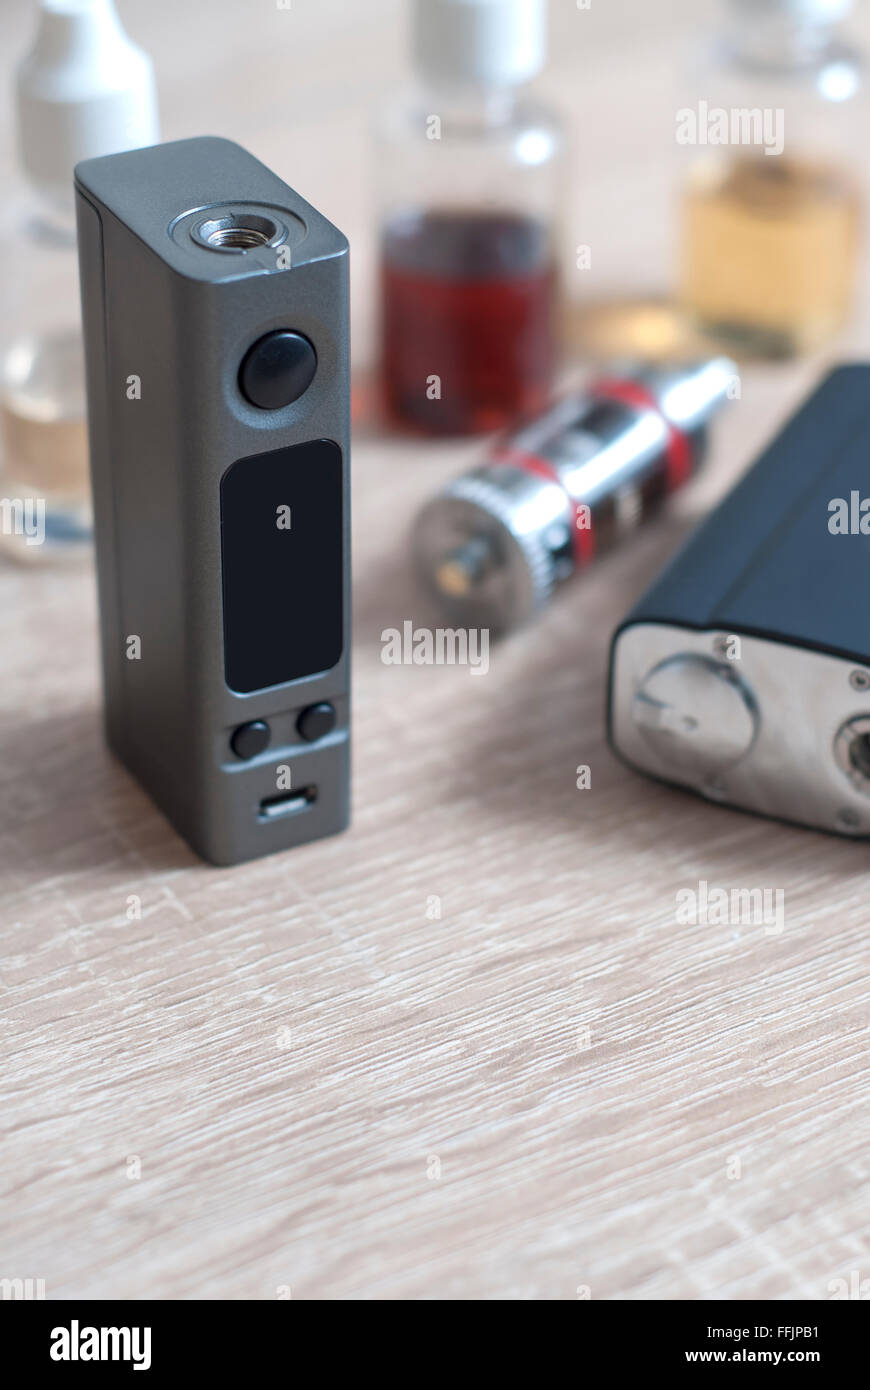 e-cigarettes with lots of different re-fill bottles, close up Stock Photo